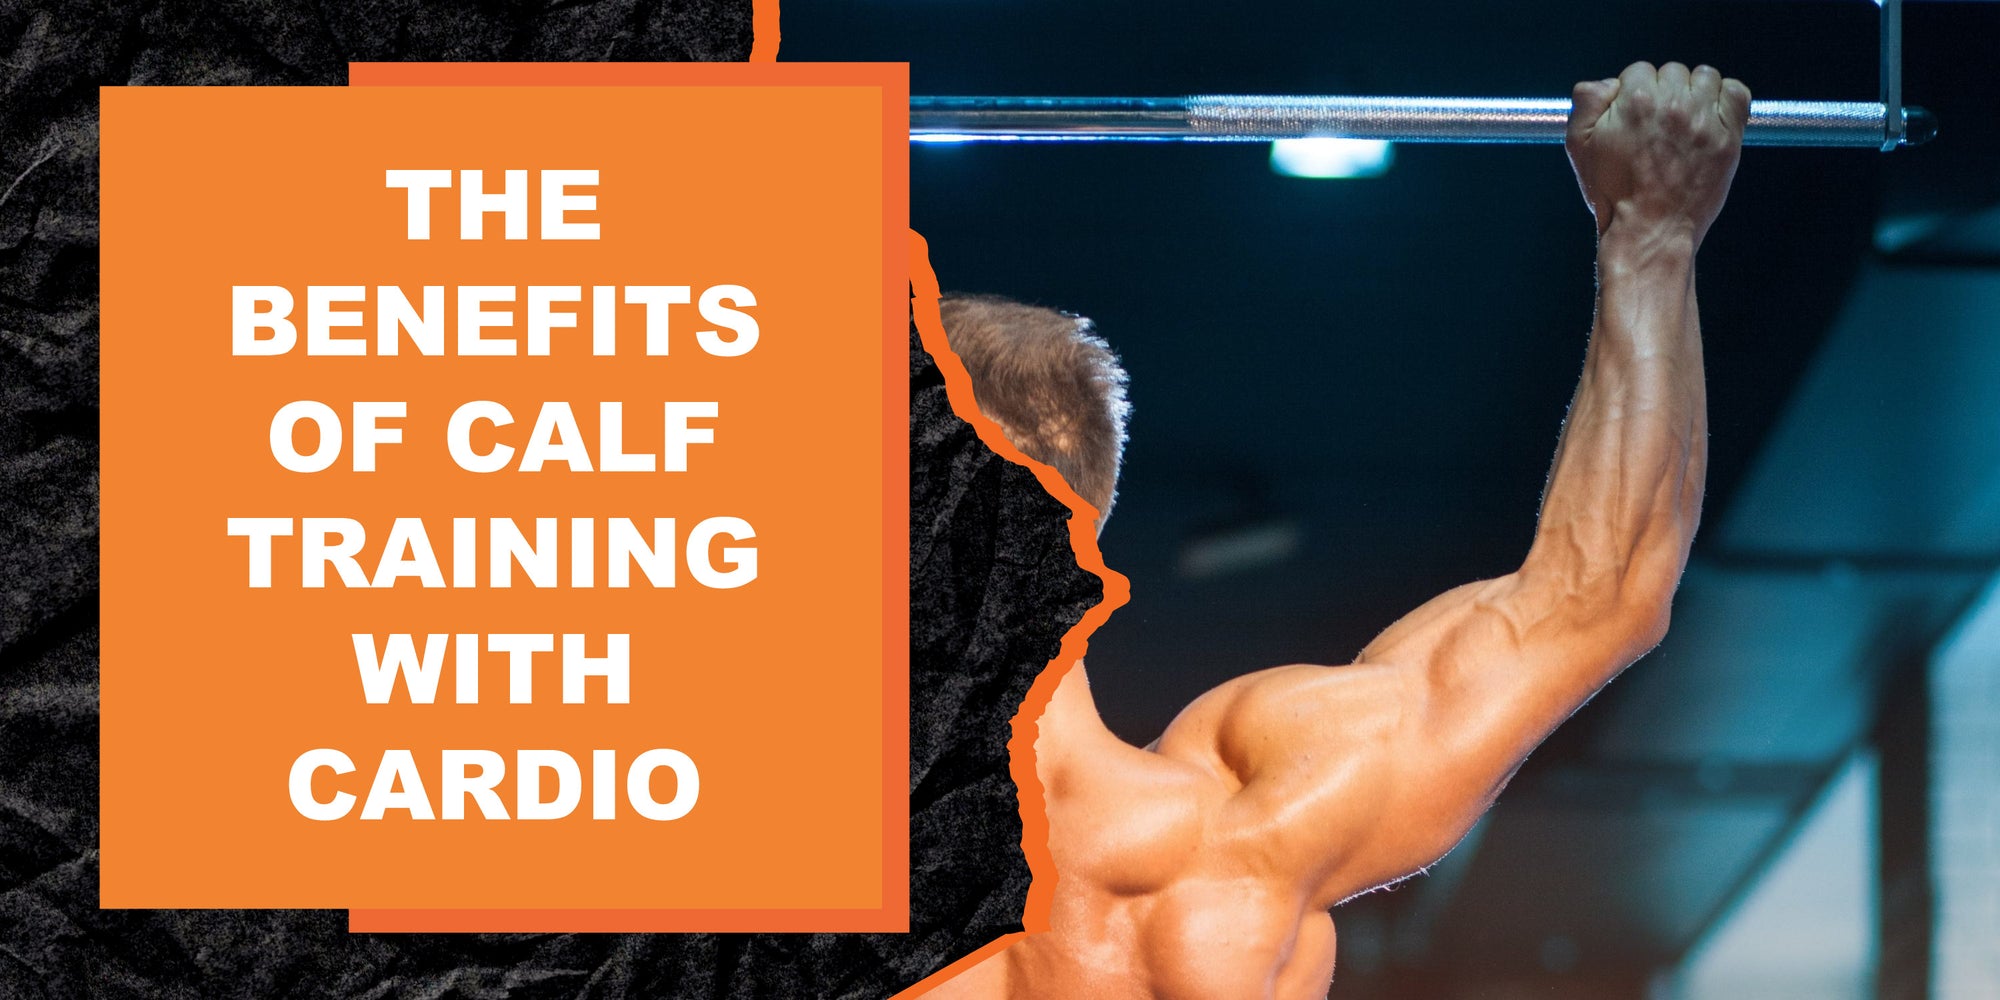 The Benefits of Calf Training with Cardio